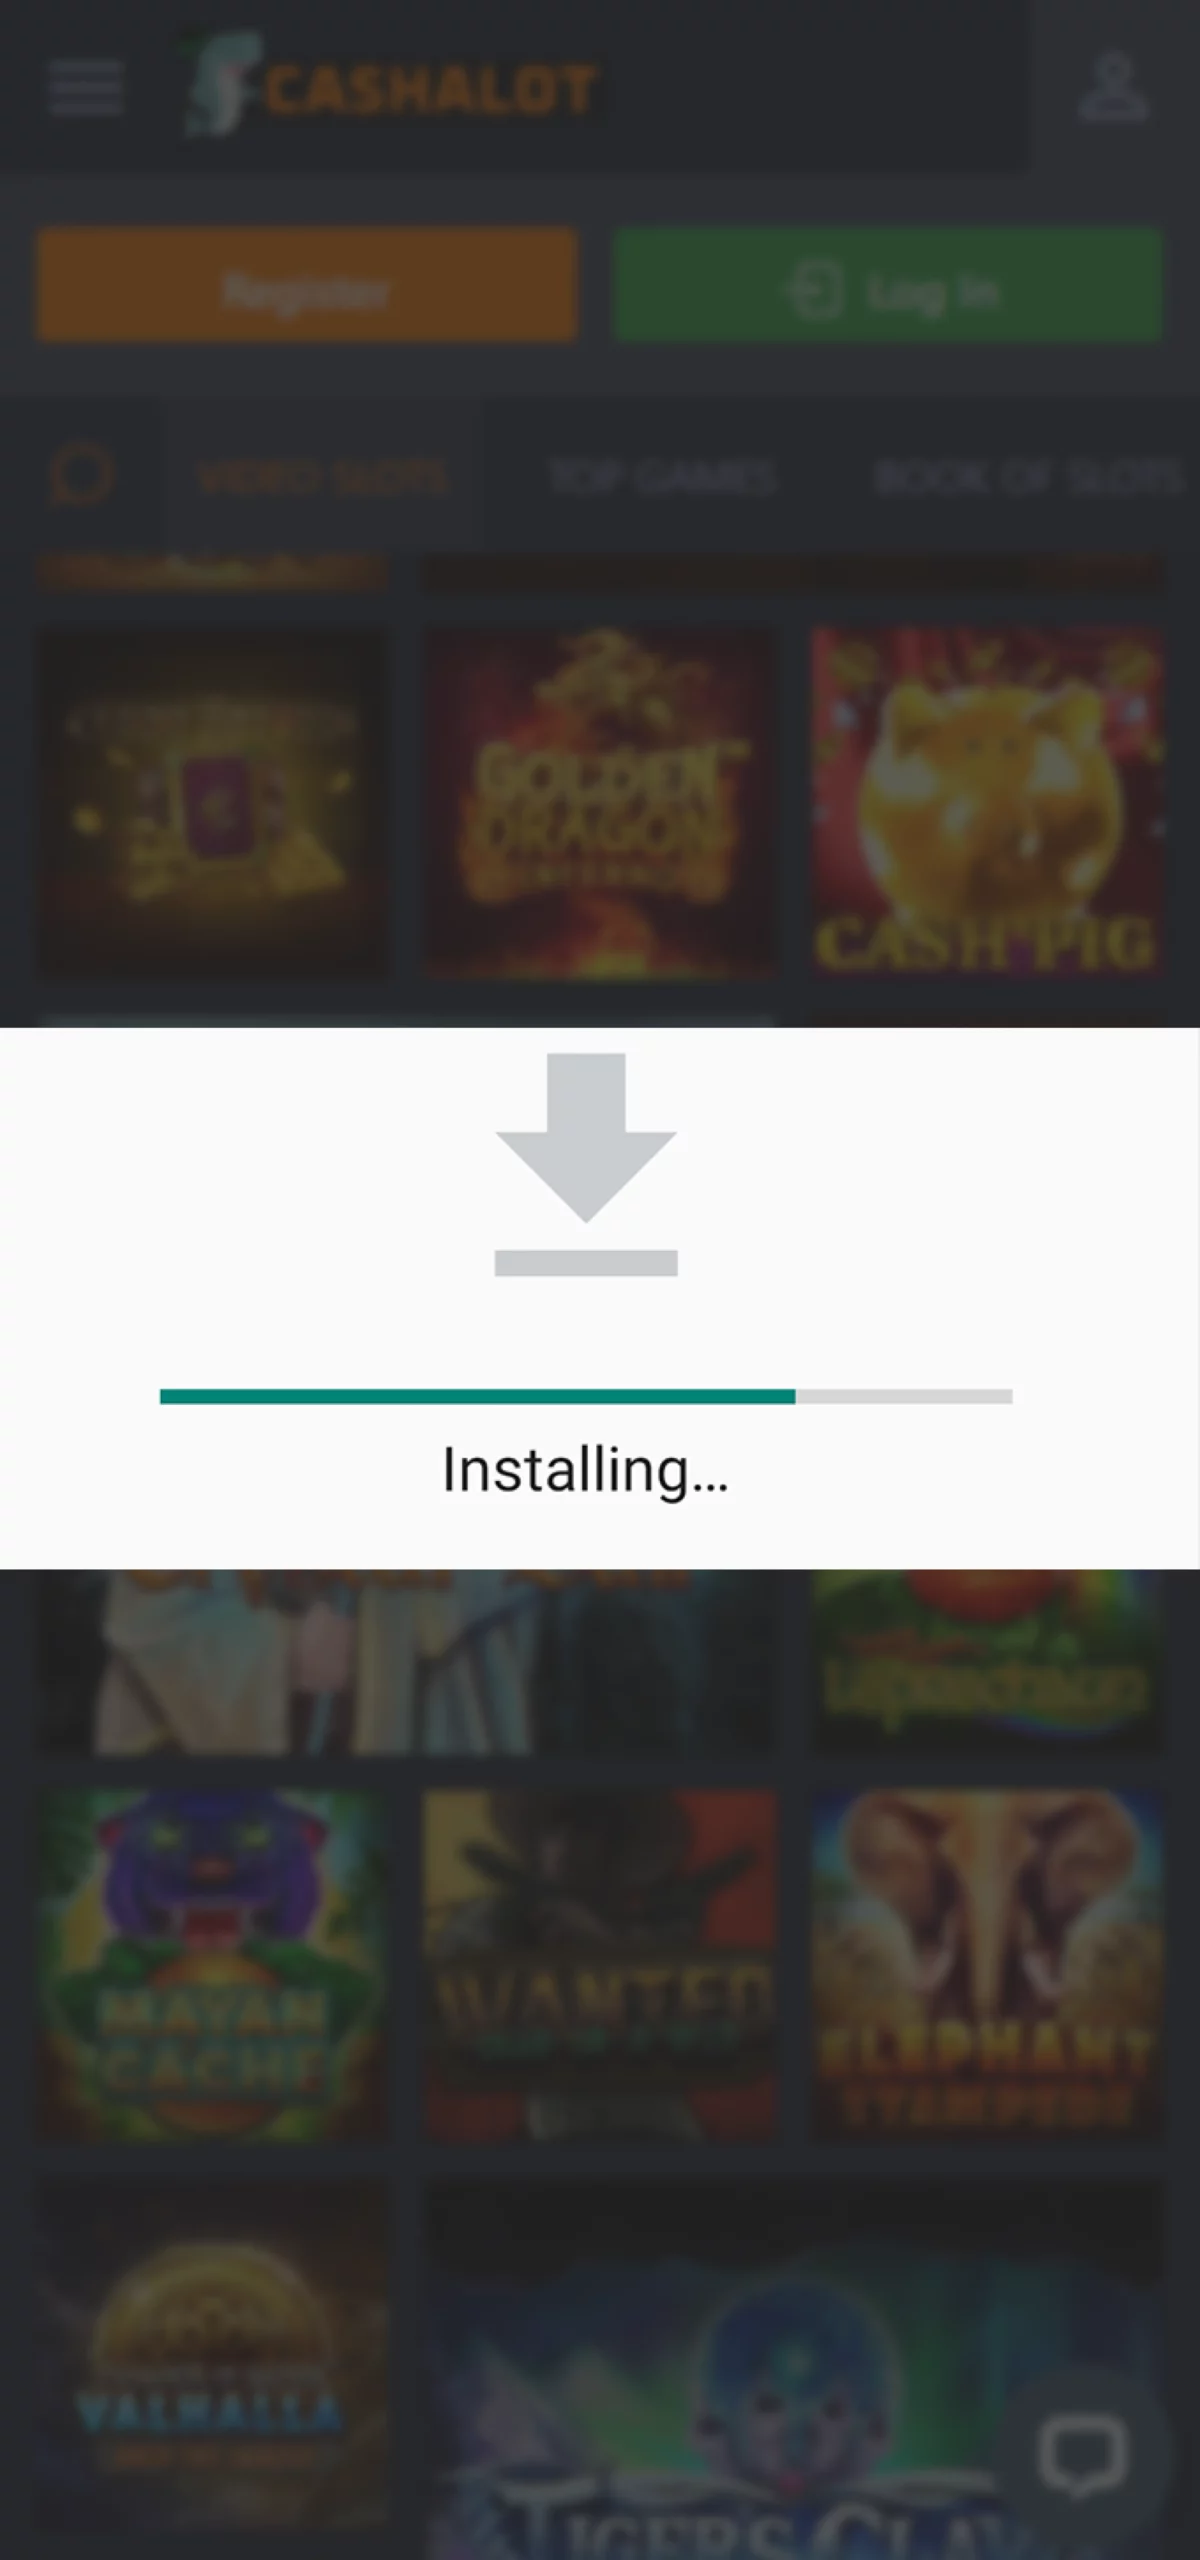 Wait for the app to install.